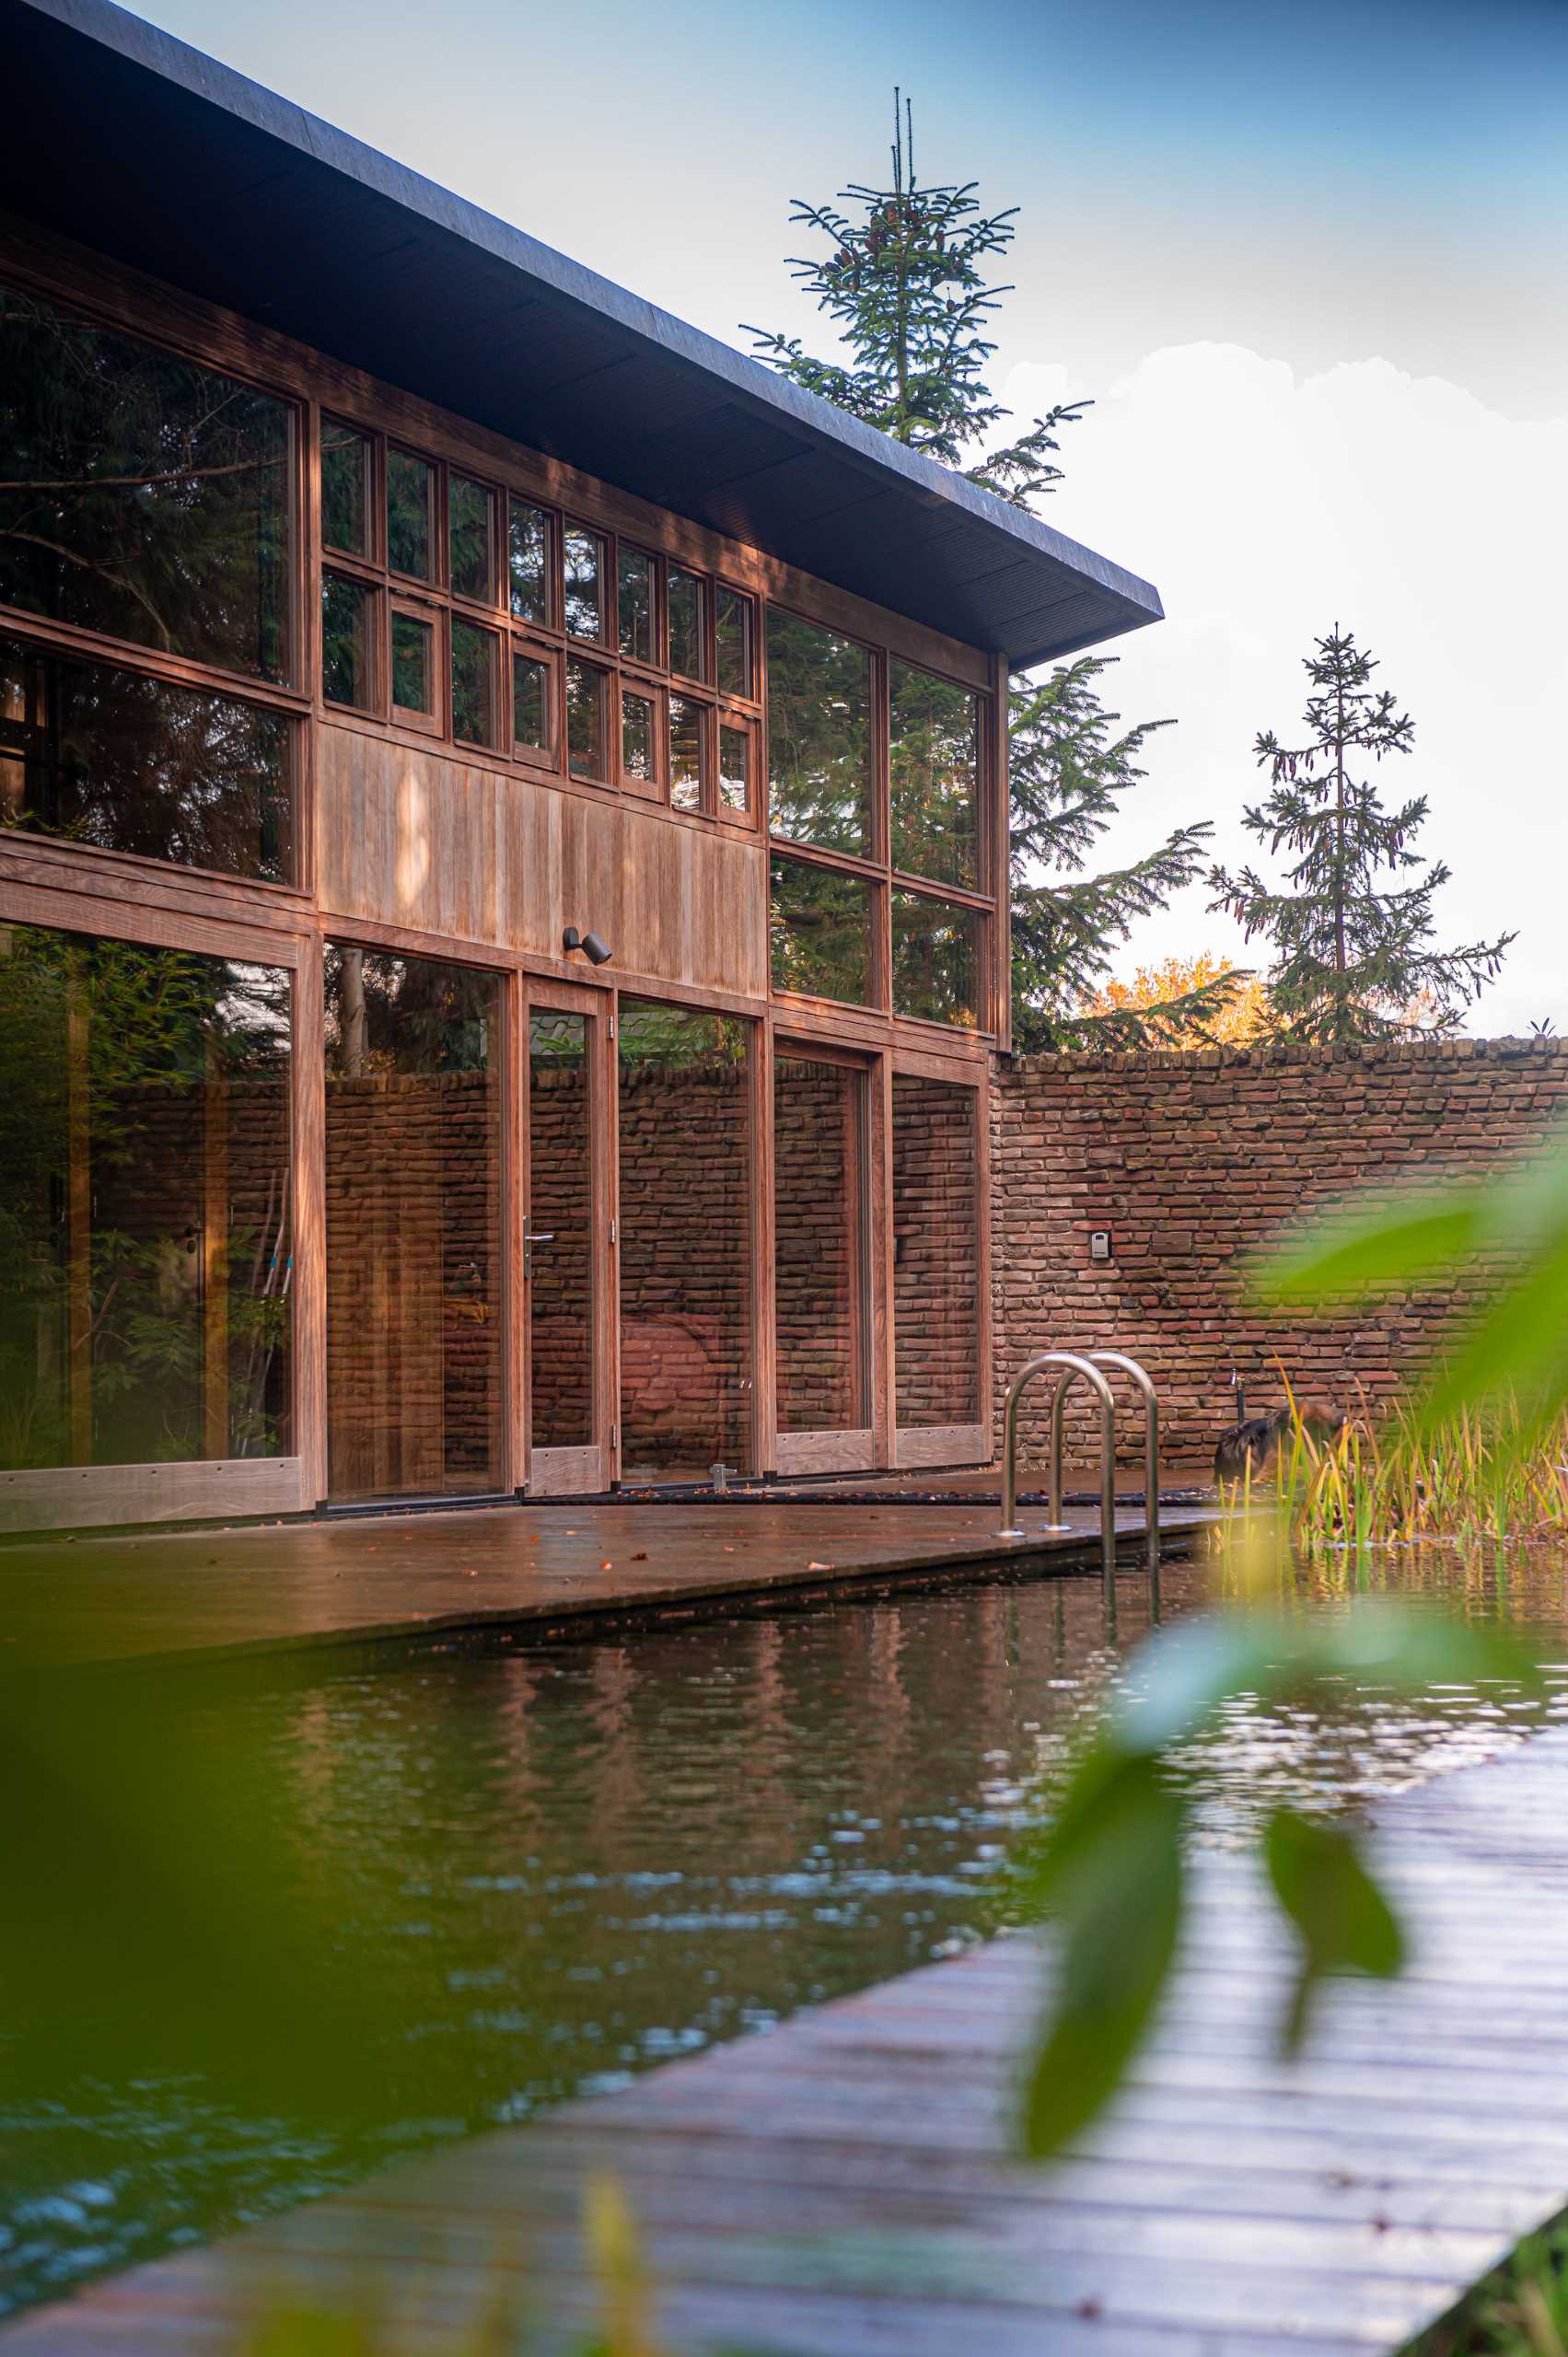 A modern home with rough and rugged materials like bricks and wood, also has a natural swimming pool.